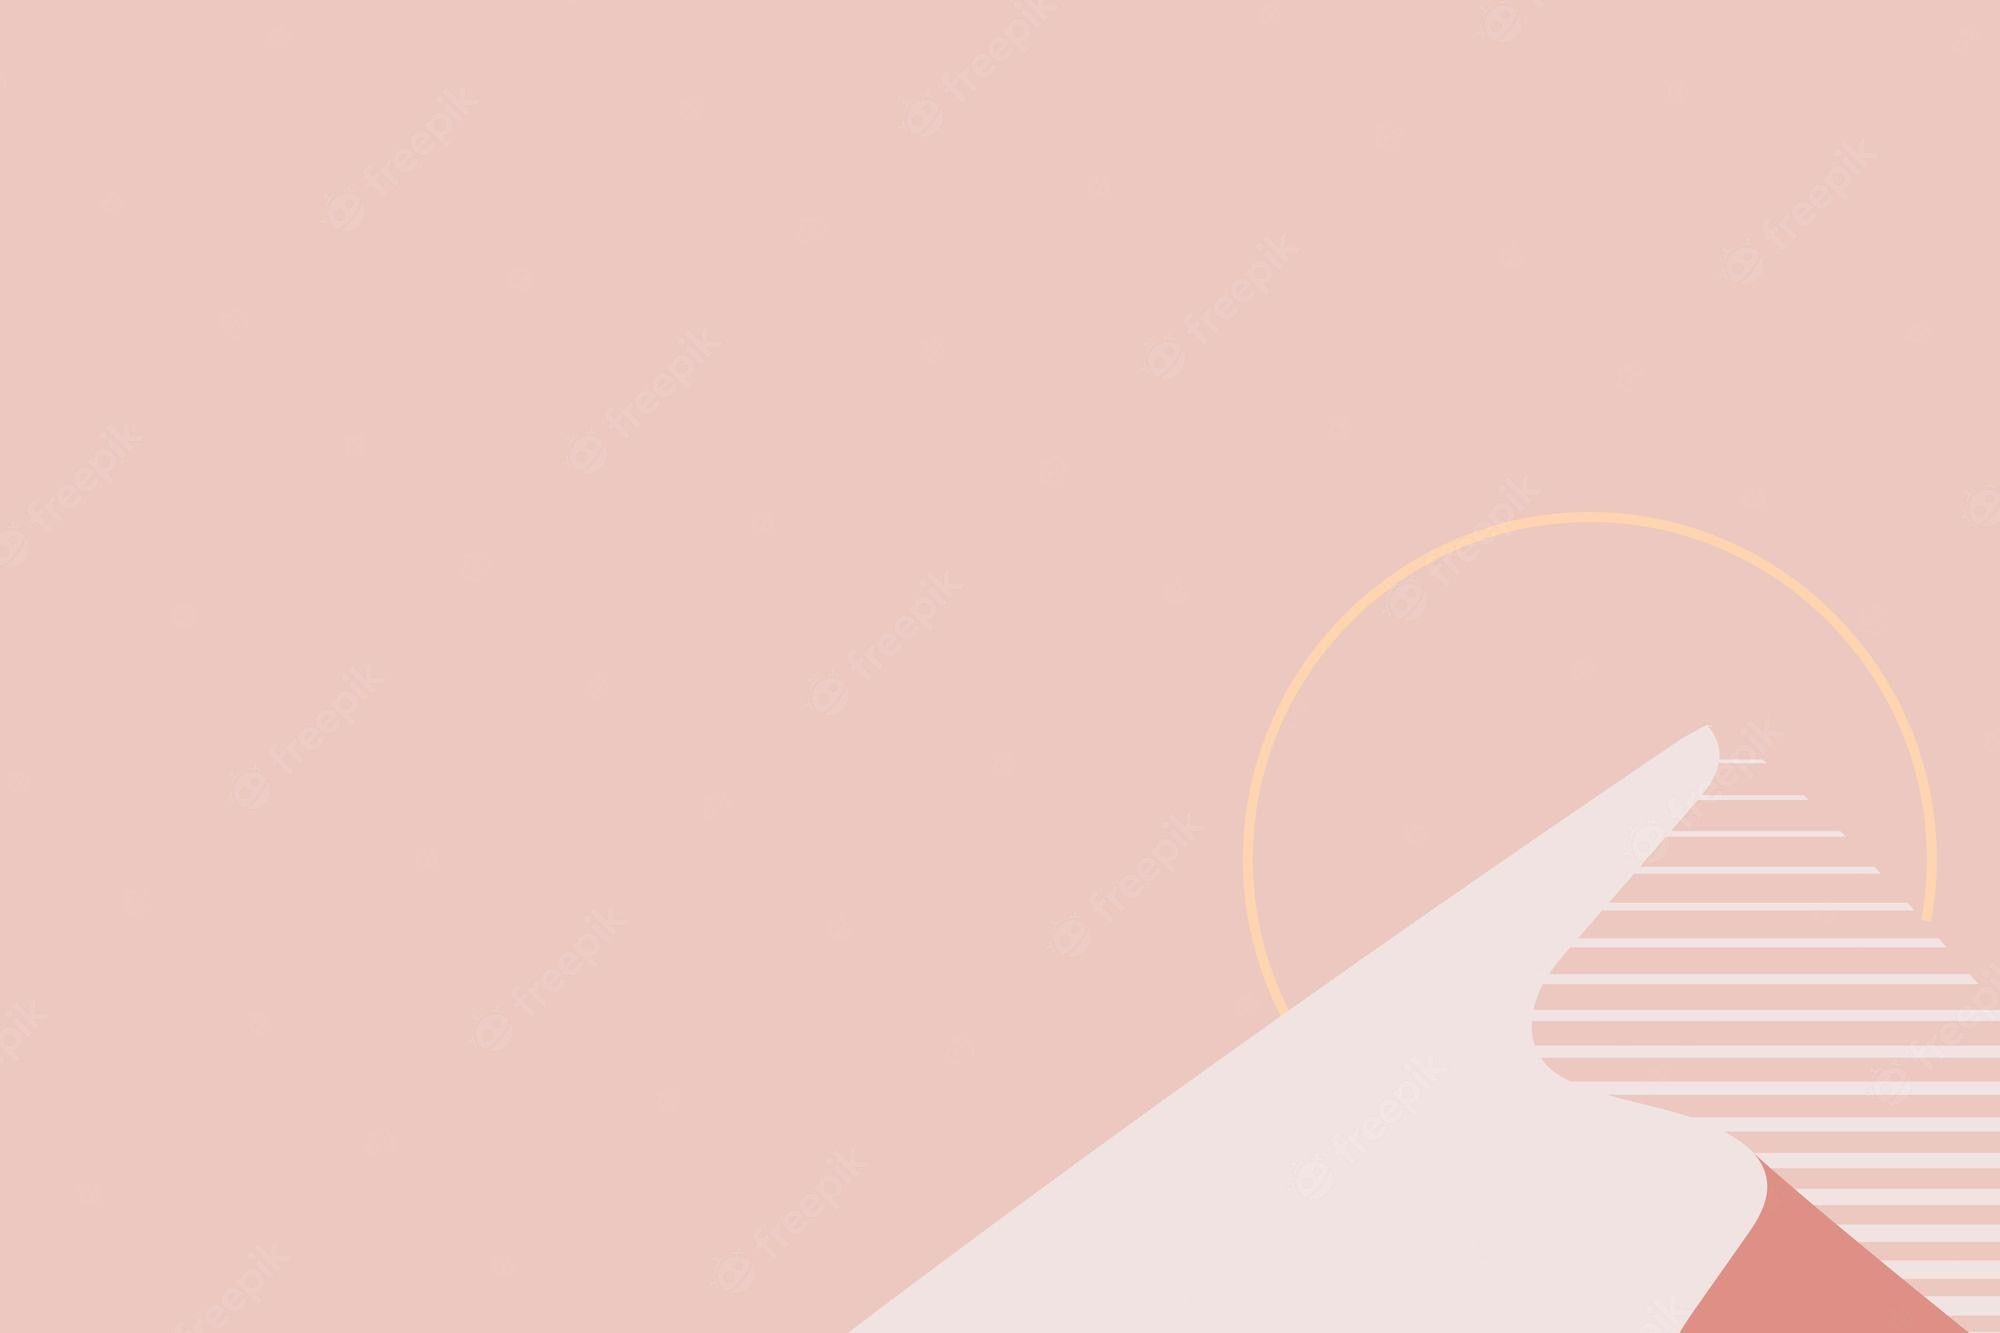 A pink graphic with a plane on it - Pastel minimalist